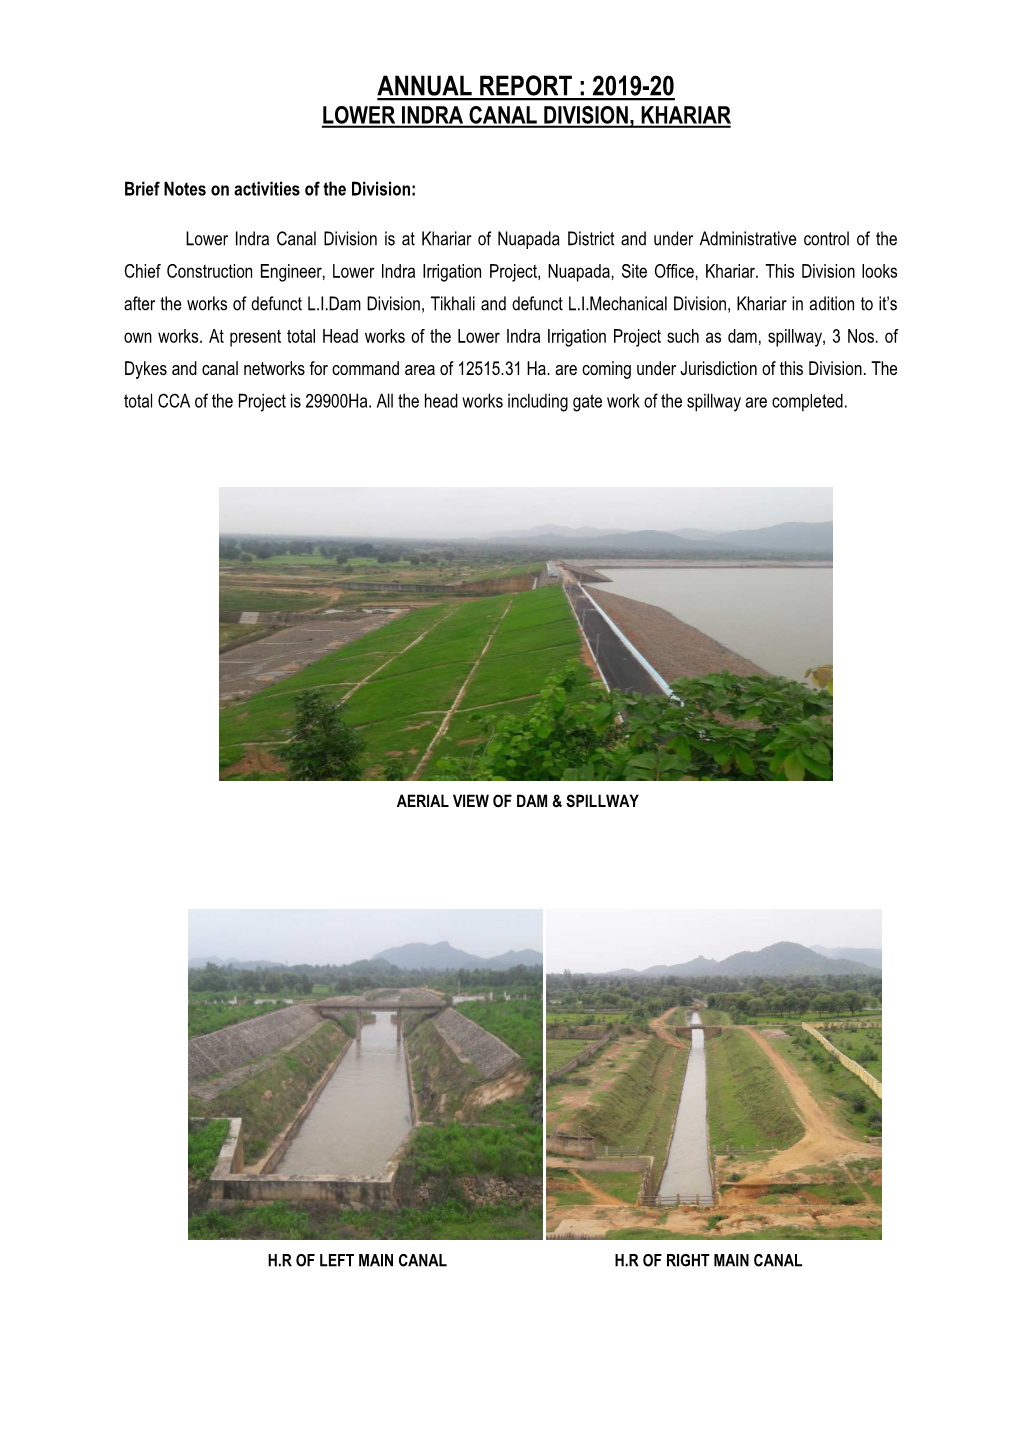 Annual Report : 2019-20 Lower Indra Canal Division, Khariar